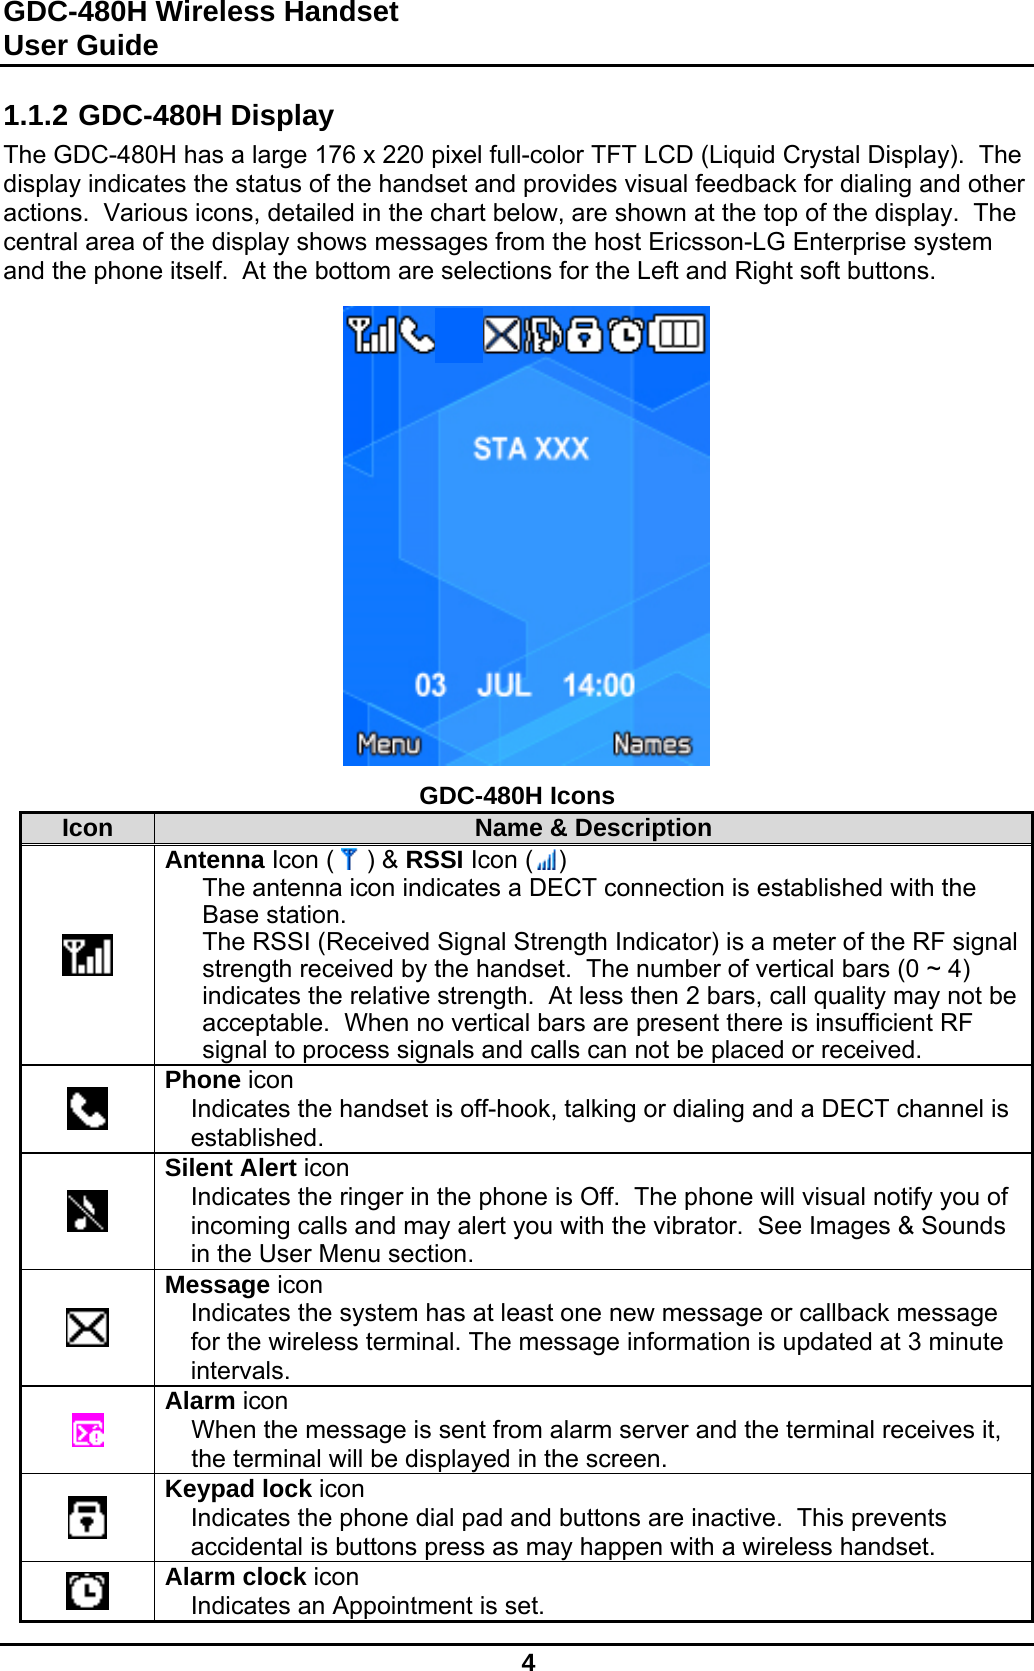 GDC-480H Wireless Handset User Guide   4  1.1.2 GDC-480H Display The GDC-480H has a large 176 x 220 pixel full-color TFT LCD (Liquid Crystal Display).  The display indicates the status of the handset and provides visual feedback for dialing and other actions.  Various icons, detailed in the chart below, are shown at the top of the display.  The central area of the display shows messages from the host Ericsson-LG Enterprise system and the phone itself.  At the bottom are selections for the Left and Right soft buttons.                  GDC-480H Icons Icon  Name &amp; Description  Antenna Icon (  ) &amp; RSSI Icon ( )  The antenna icon indicates a DECT connection is established with the Base station. The RSSI (Received Signal Strength Indicator) is a meter of the RF signal strength received by the handset.  The number of vertical bars (0 ~ 4) indicates the relative strength.  At less then 2 bars, call quality may not be acceptable.  When no vertical bars are present there is insufficient RF signal to process signals and calls can not be placed or received.   Phone icon Indicates the handset is off-hook, talking or dialing and a DECT channel is established.  Silent Alert icon Indicates the ringer in the phone is Off.  The phone will visual notify you of incoming calls and may alert you with the vibrator.  See Images &amp; Sounds in the User Menu section.  Message icon Indicates the system has at least one new message or callback message for the wireless terminal. The message information is updated at 3 minute intervals.  Alarm icon When the message is sent from alarm server and the terminal receives it, the terminal will be displayed in the screen.  Keypad lock icon Indicates the phone dial pad and buttons are inactive.  This prevents accidental is buttons press as may happen with a wireless handset.  Alarm clock icon Indicates an Appointment is set.  